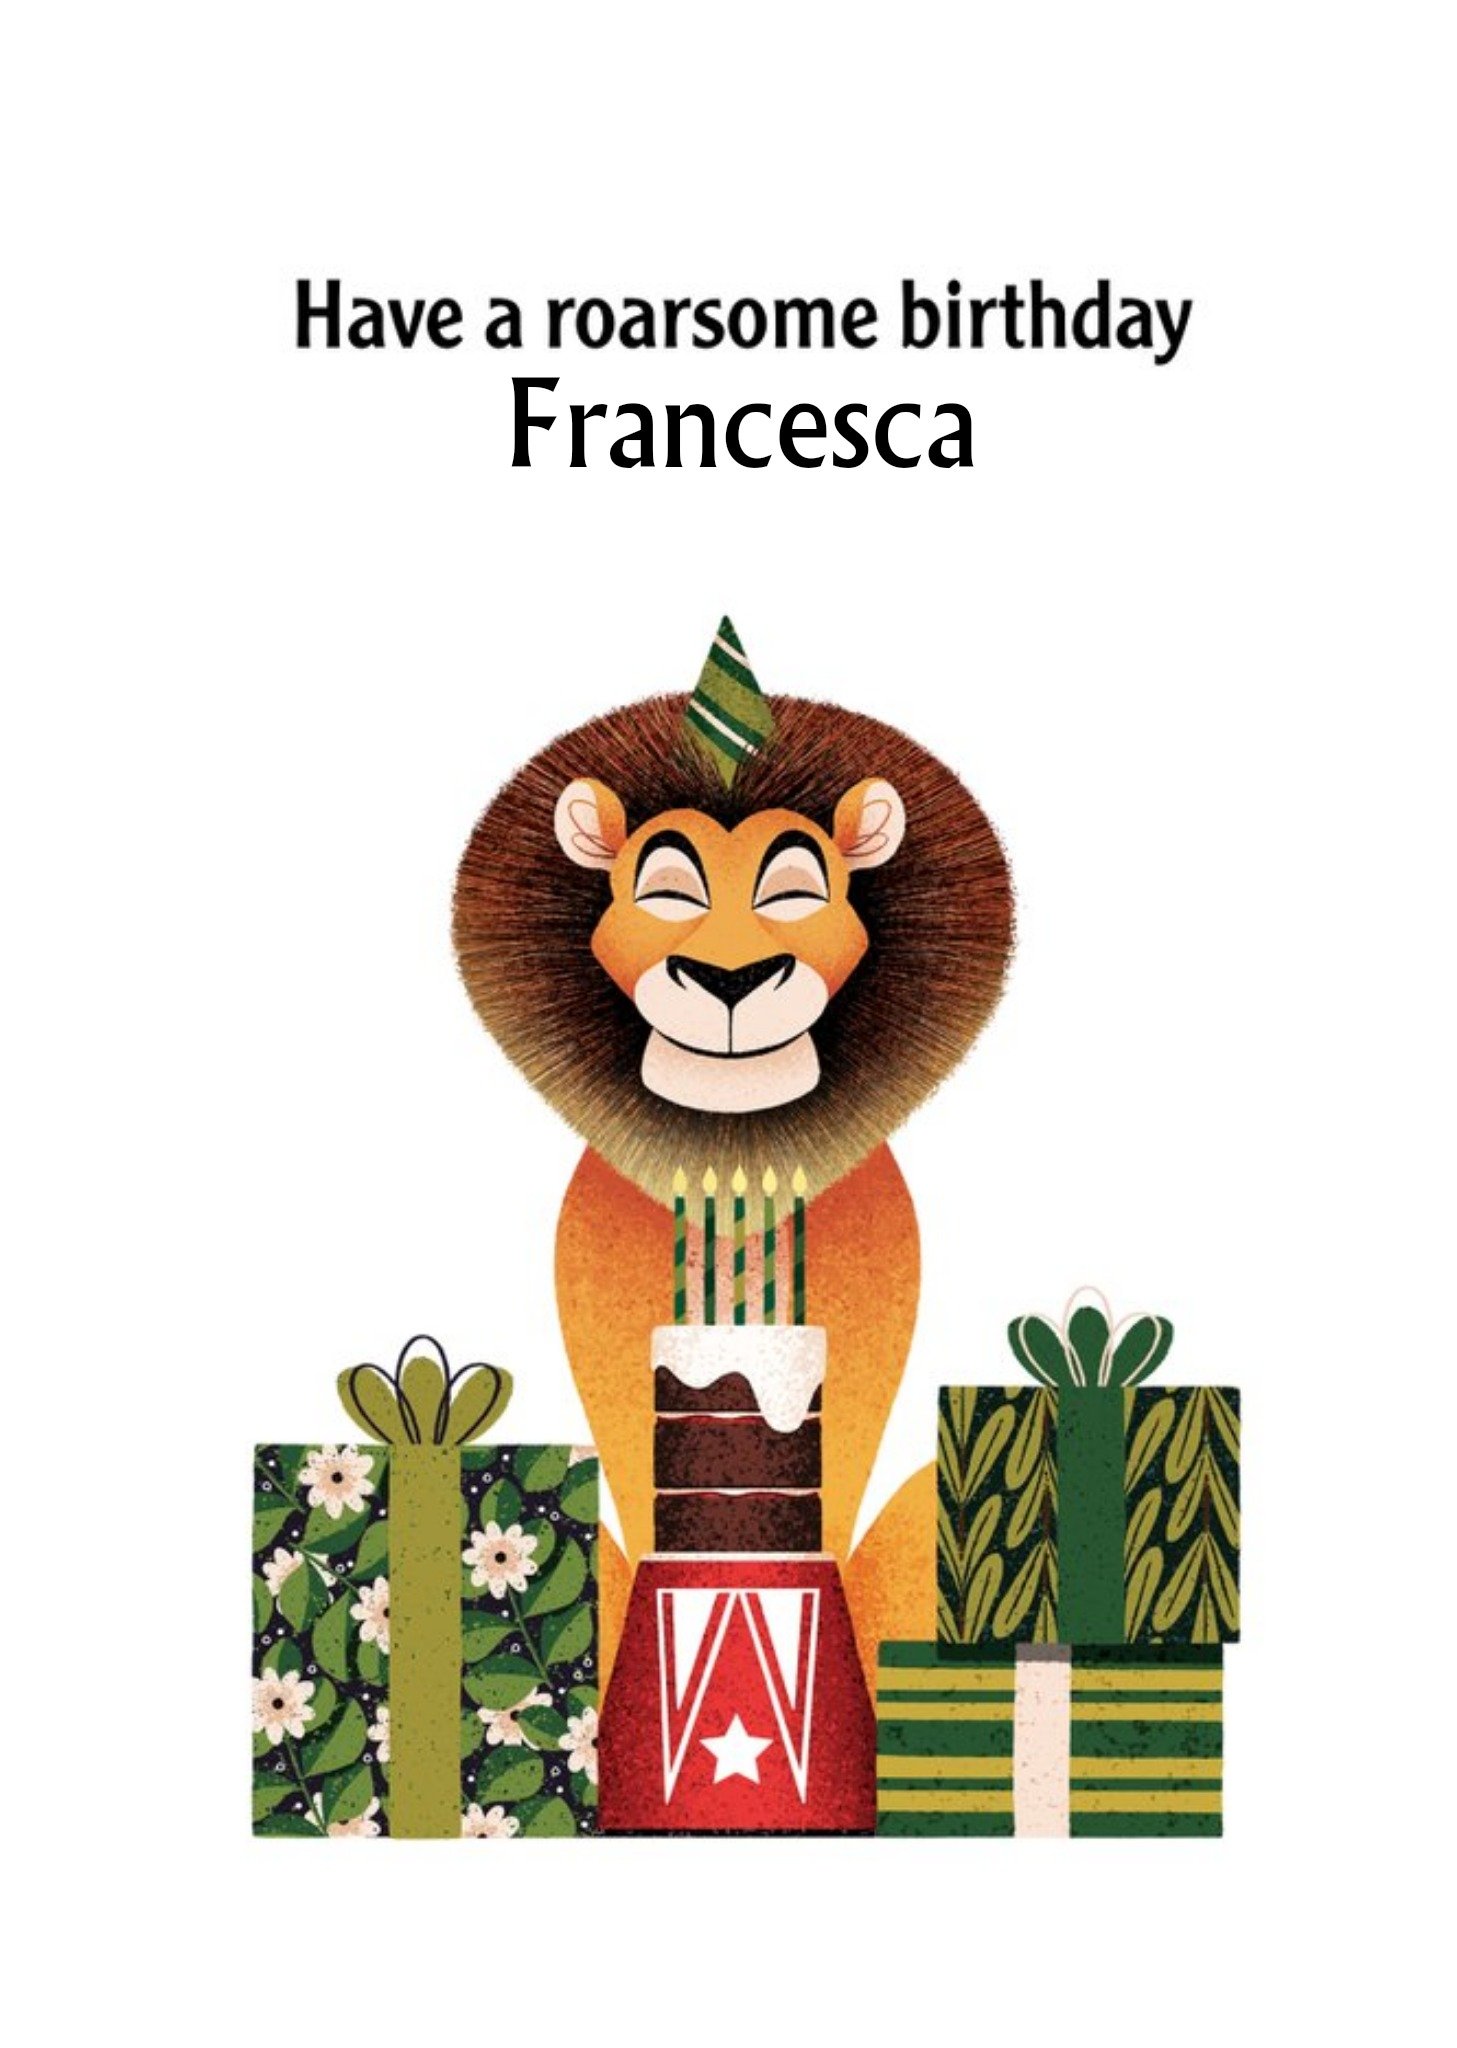 Moonpig Beautiful Illustration Of A Smiling Lion With A Cake And Presents Personalised Birthday Card